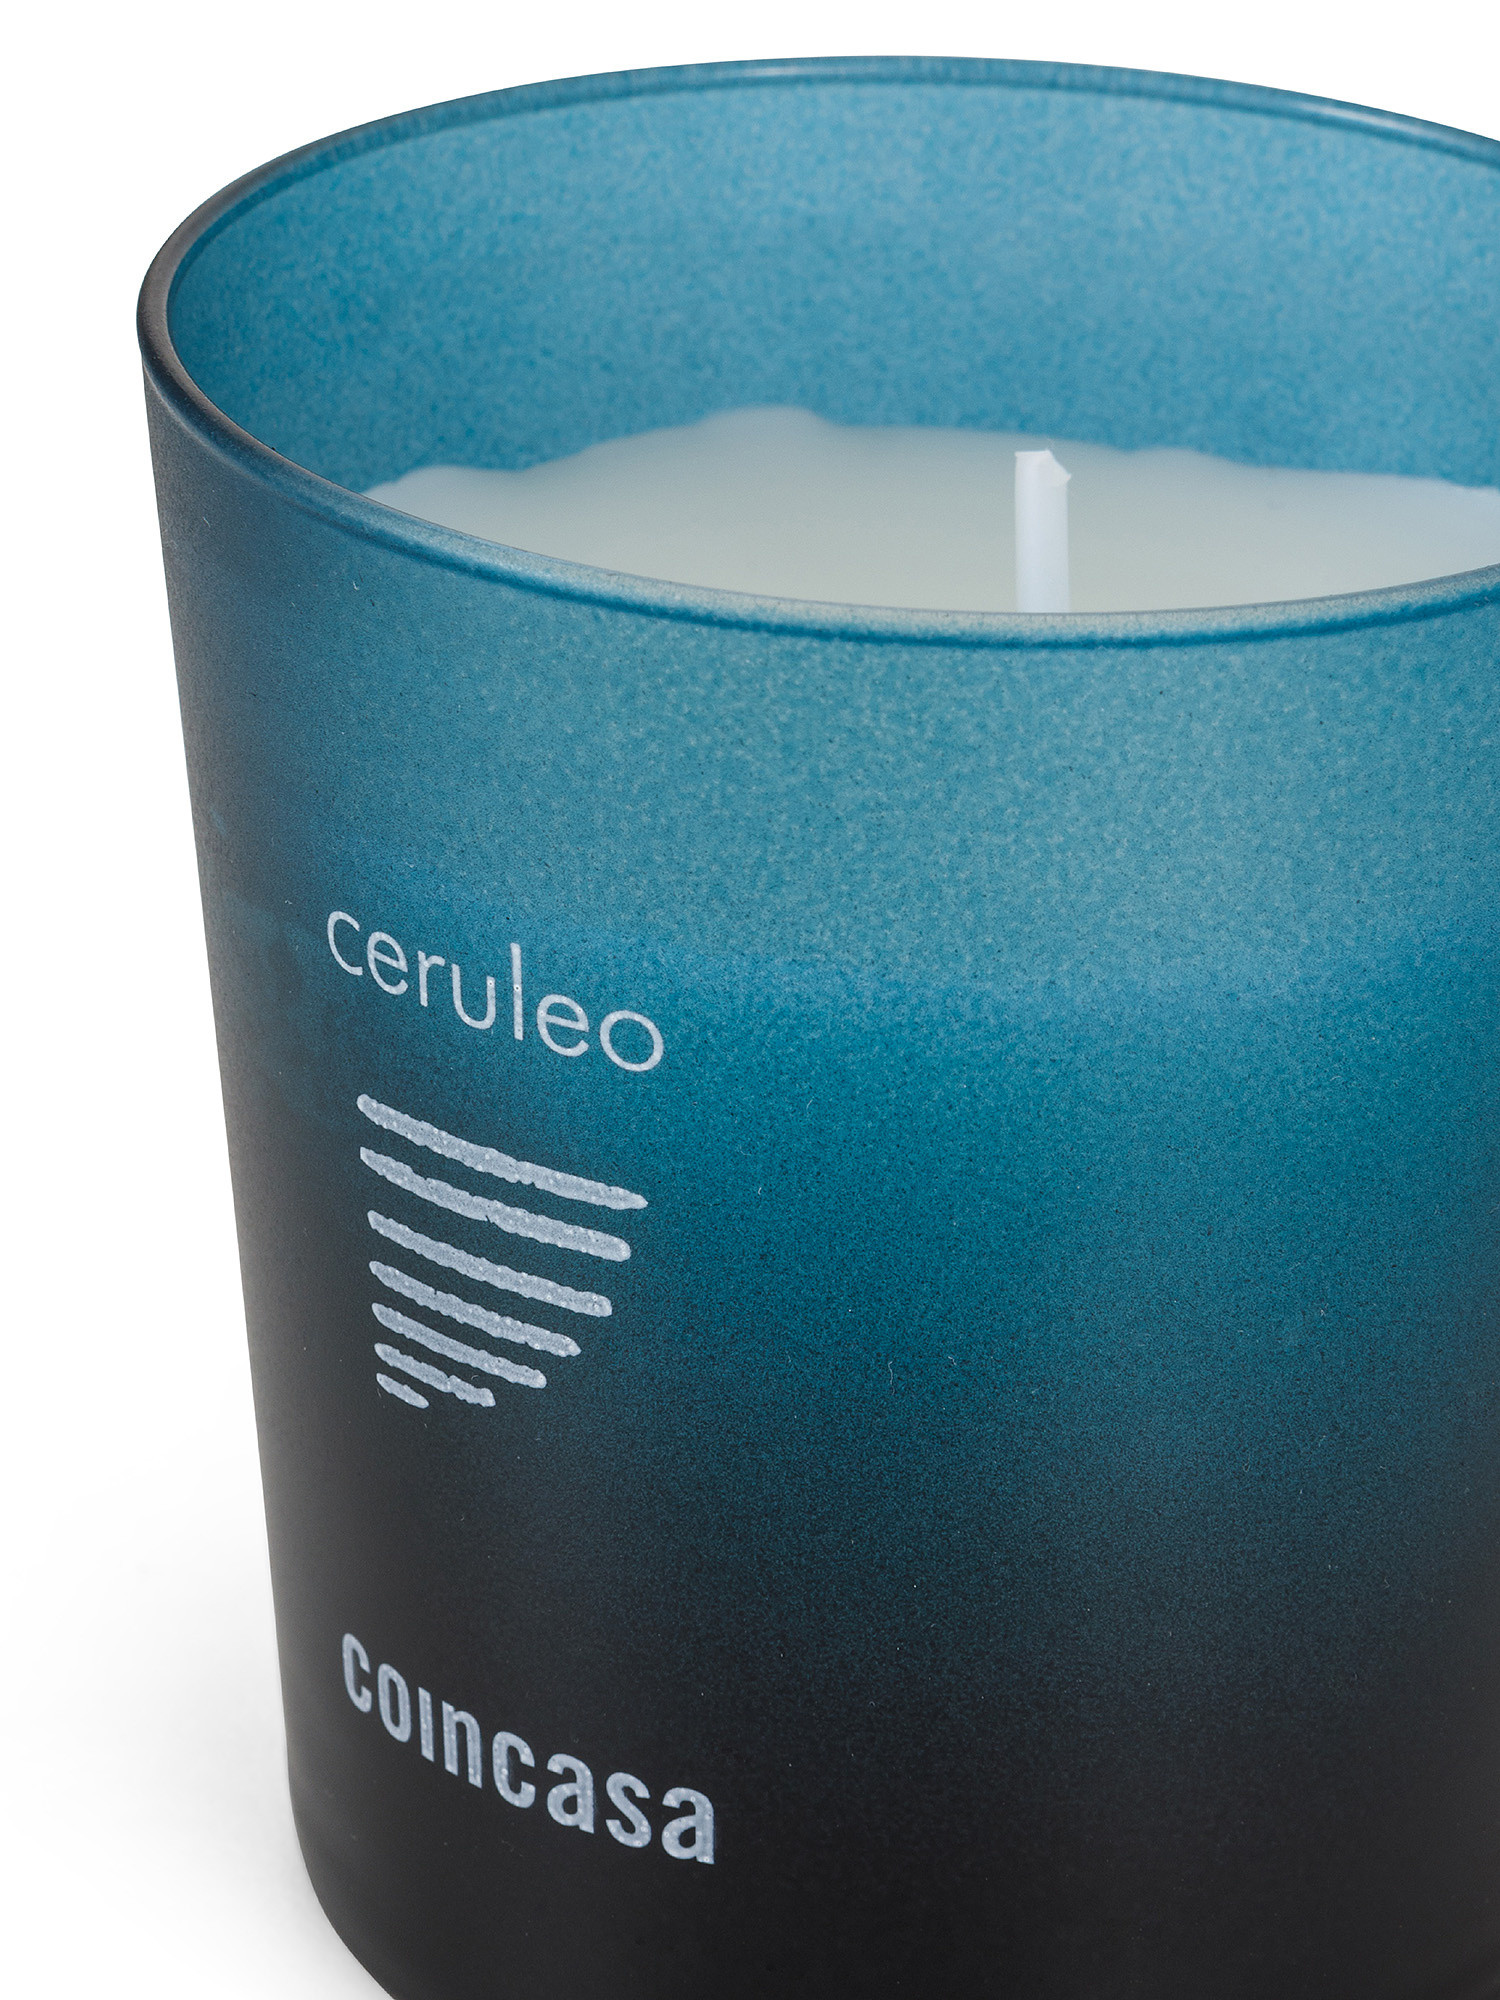 Ceruleo Candle - Iris and Talc, Black, large image number 2